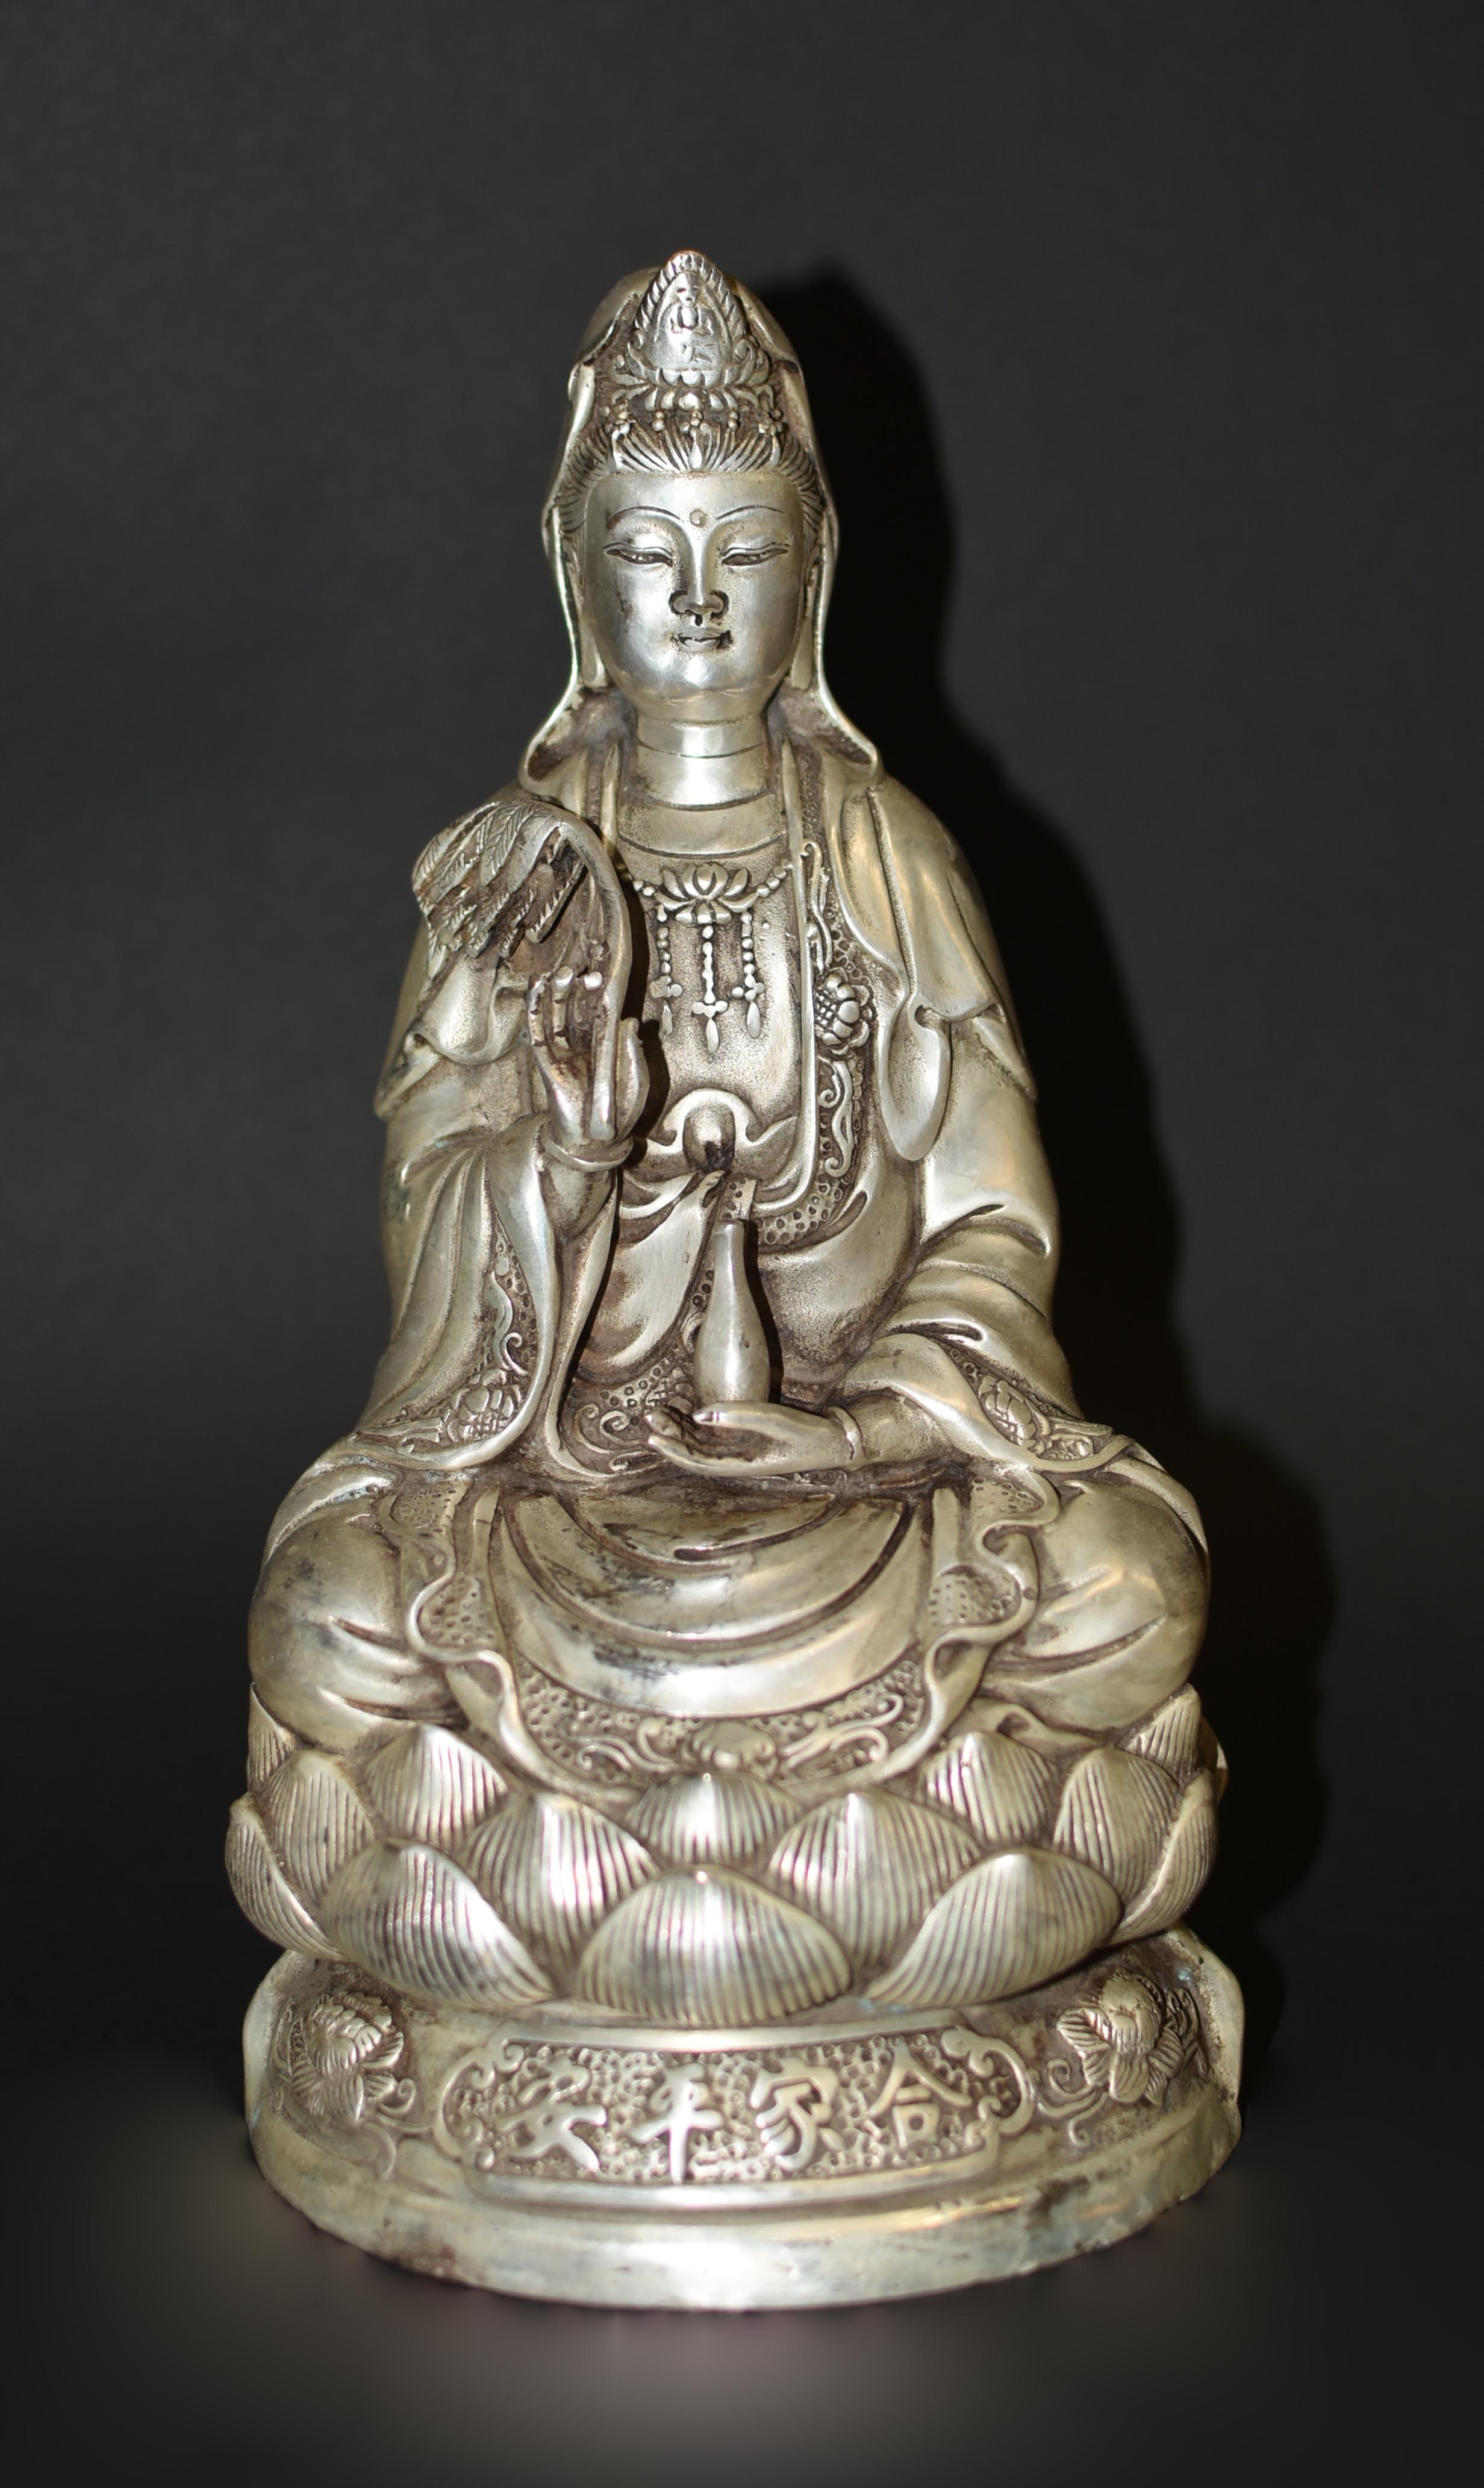 A large 7.15 lb Republic era silver bronze statue of the Goddess of Compassion Guan Yin. Seated on lotus throne, Bodhisattva Avalokiteshvara is depicted in the most traditional fashion. The Tang style face is broad and serene, with downcast eyes